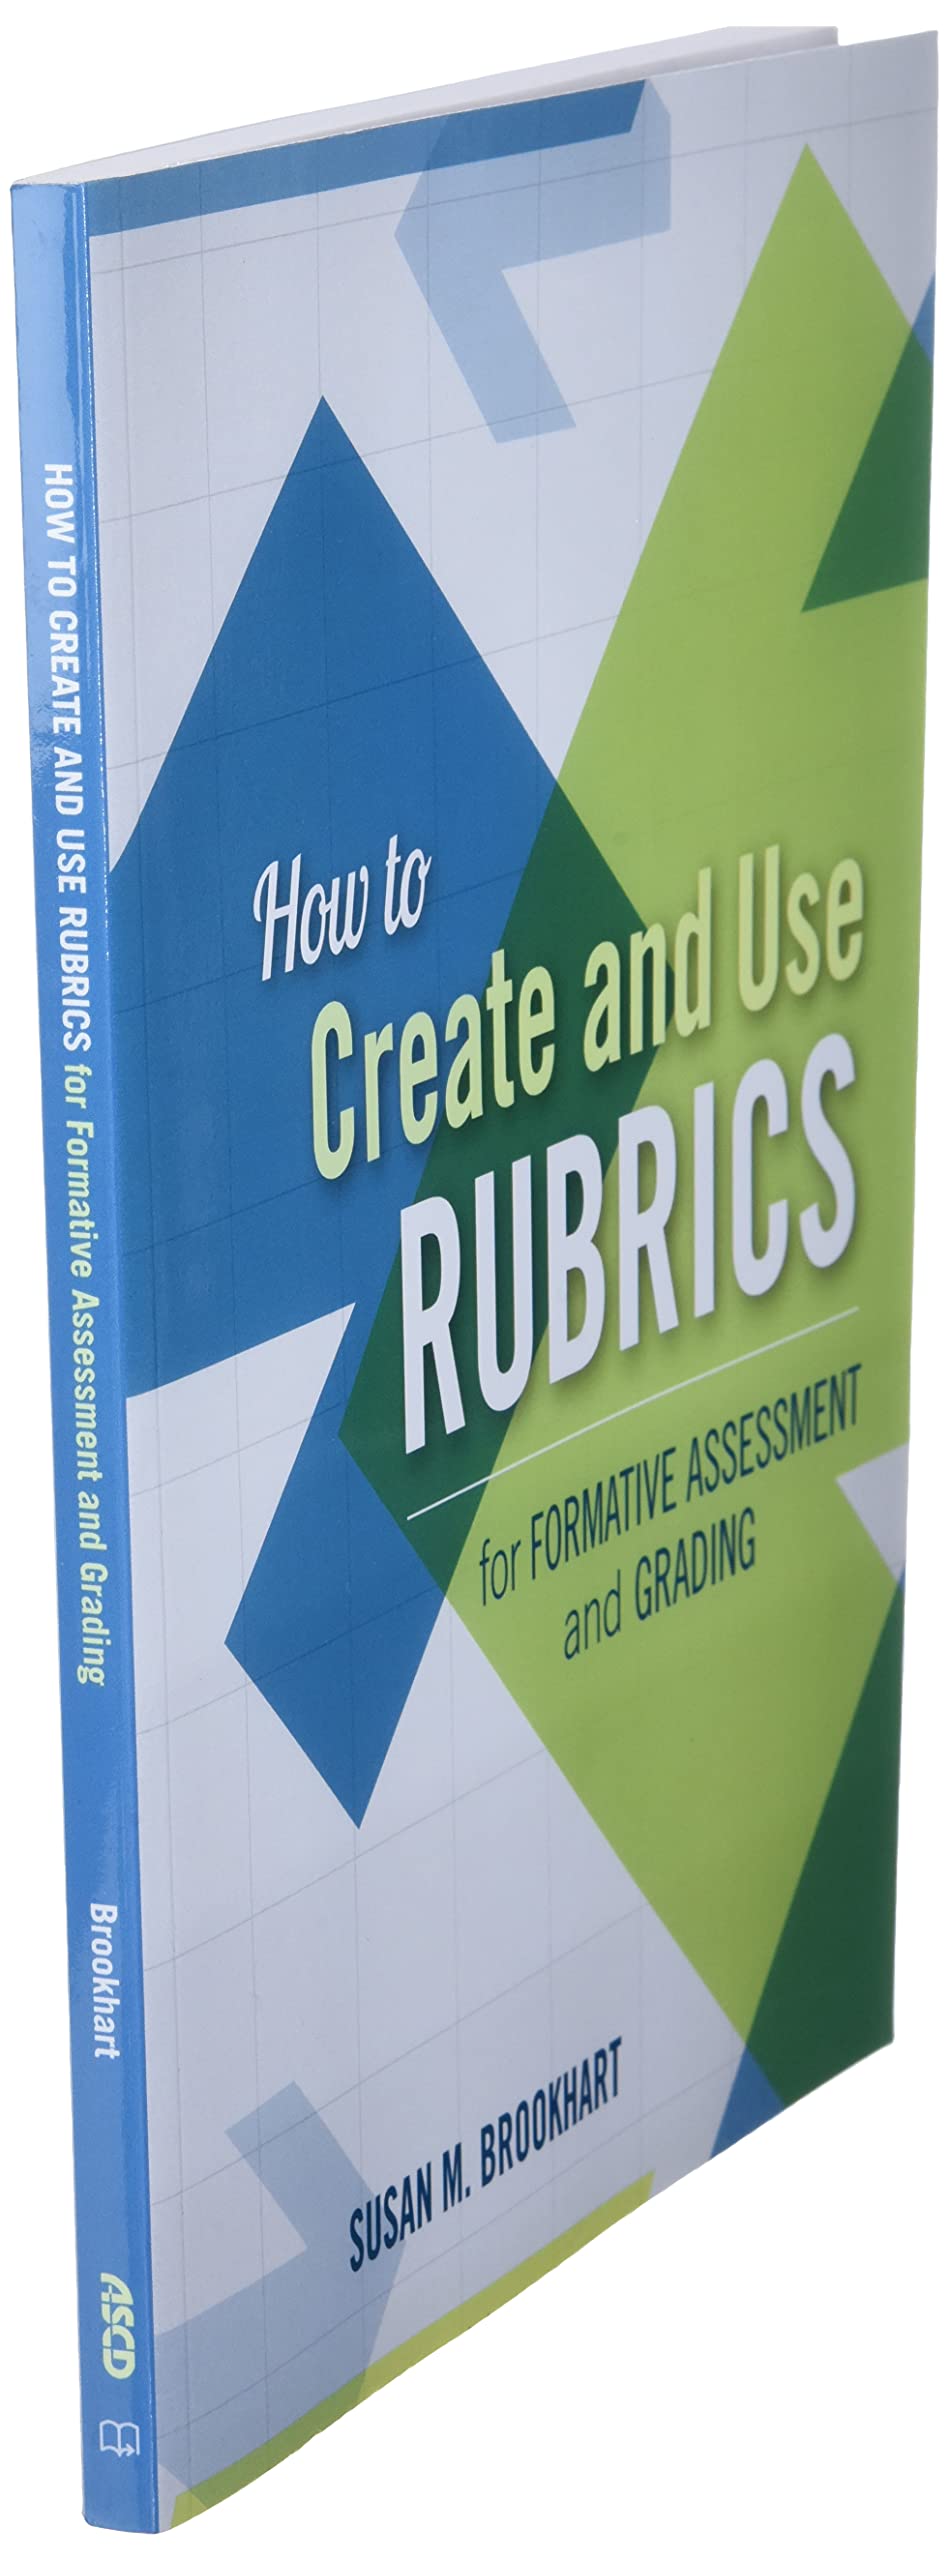 Mua How To Create And Use Rubrics For Formative Assessment And Grading Trên Amazon Mỹ Chính Hãng 0734